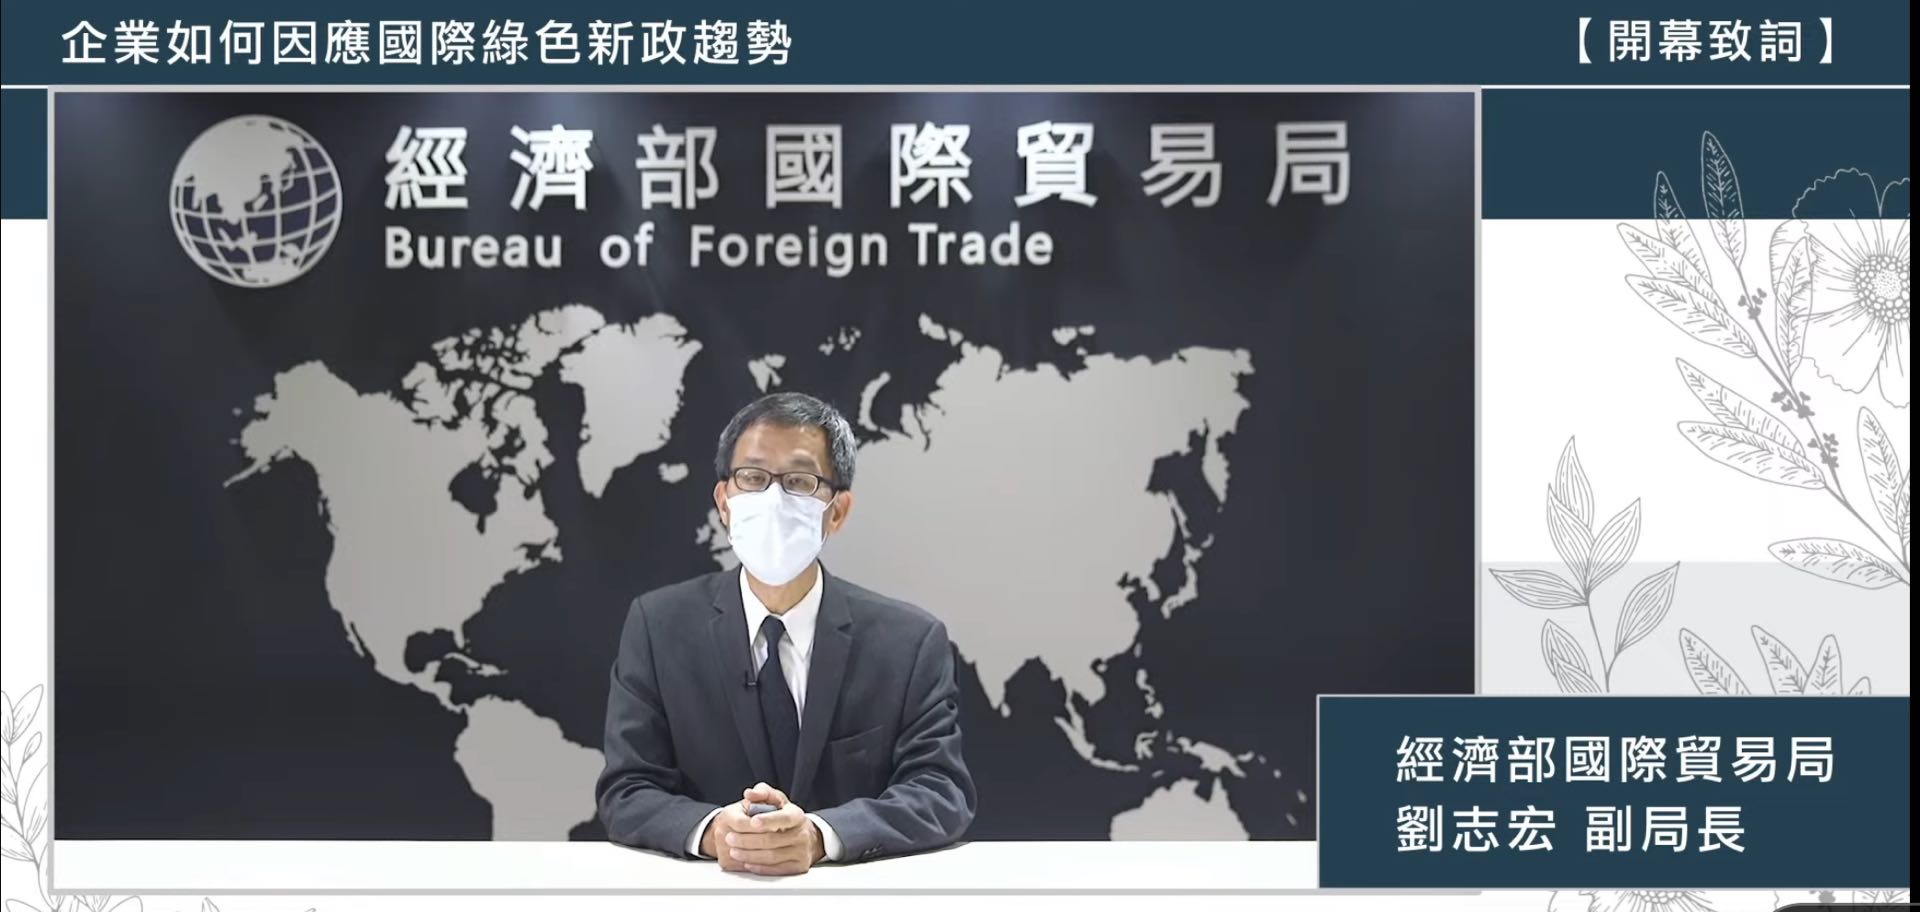 Liu Zhi Hong (劉志宏), the Deputy Director of Bureau of Foreign Trade, MOEA promotes industrial transformation and international connections. (Photo / Provided by the Bureau of Foreign Trade, MOEA)